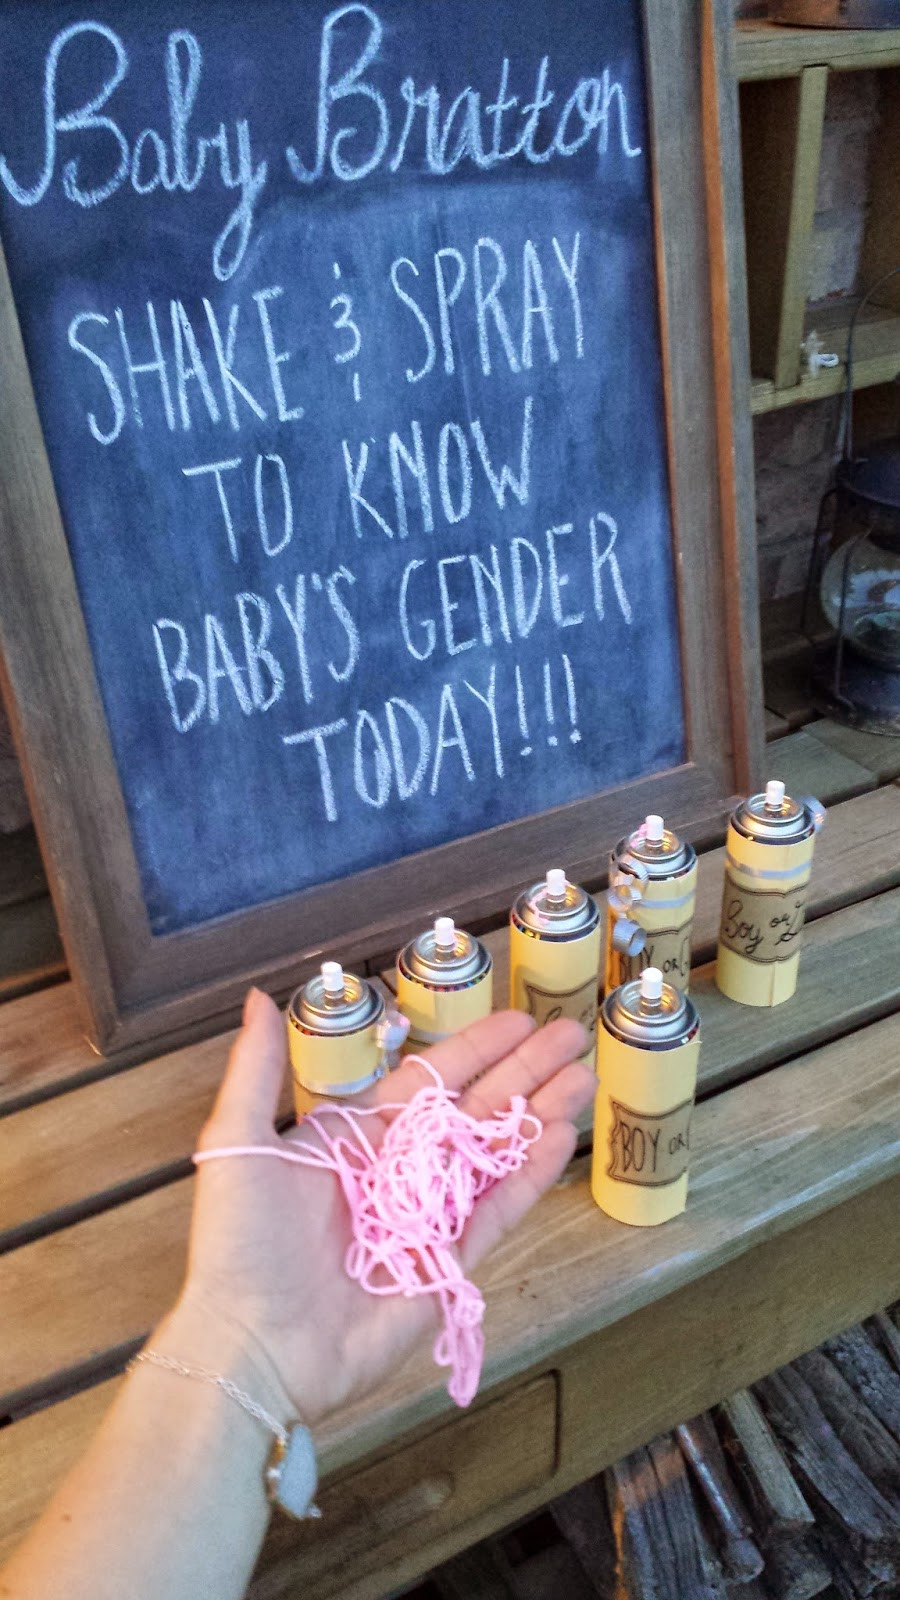 Cute Ideas For Baby Gender Reveal Party
 Lively Happenings Our Creative Gender Reveal with Silly